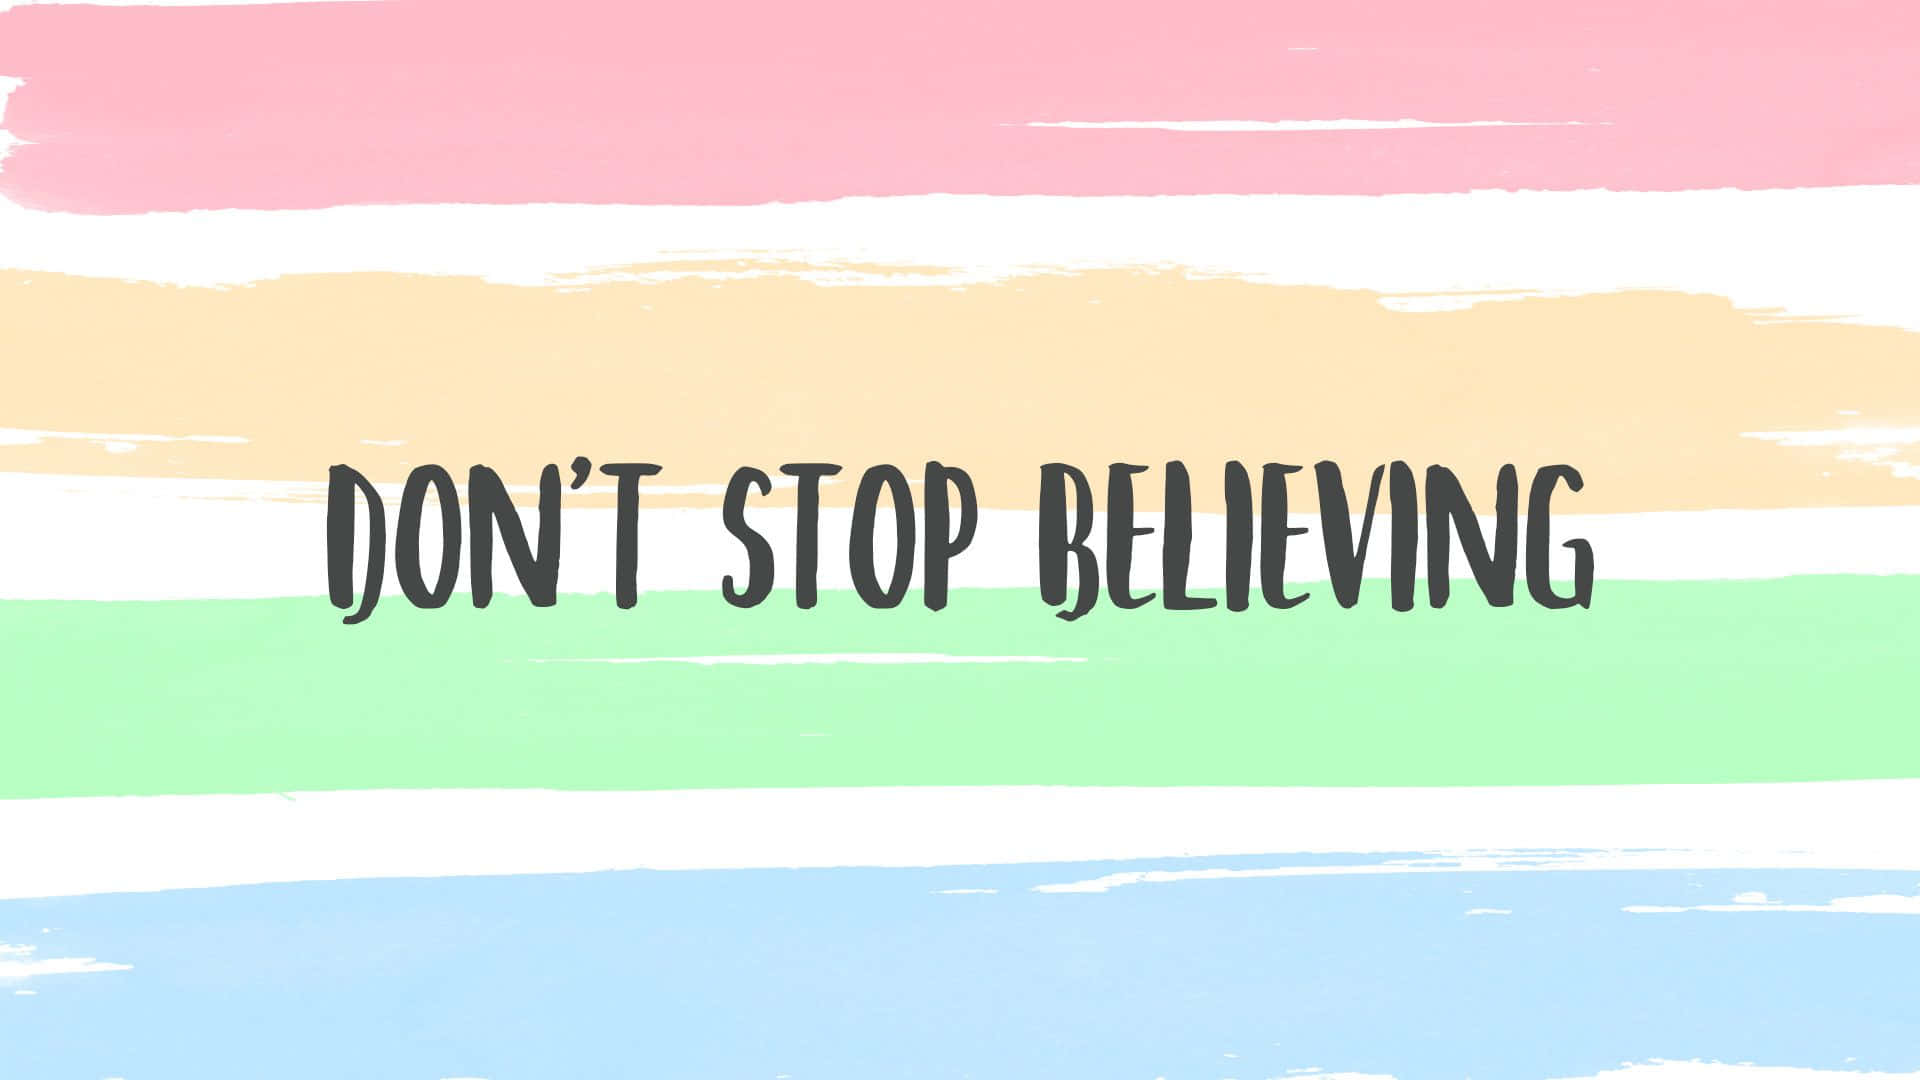 Don't Stop Believing - A Rainbow Colored Background With The Words Don't Stop Believing